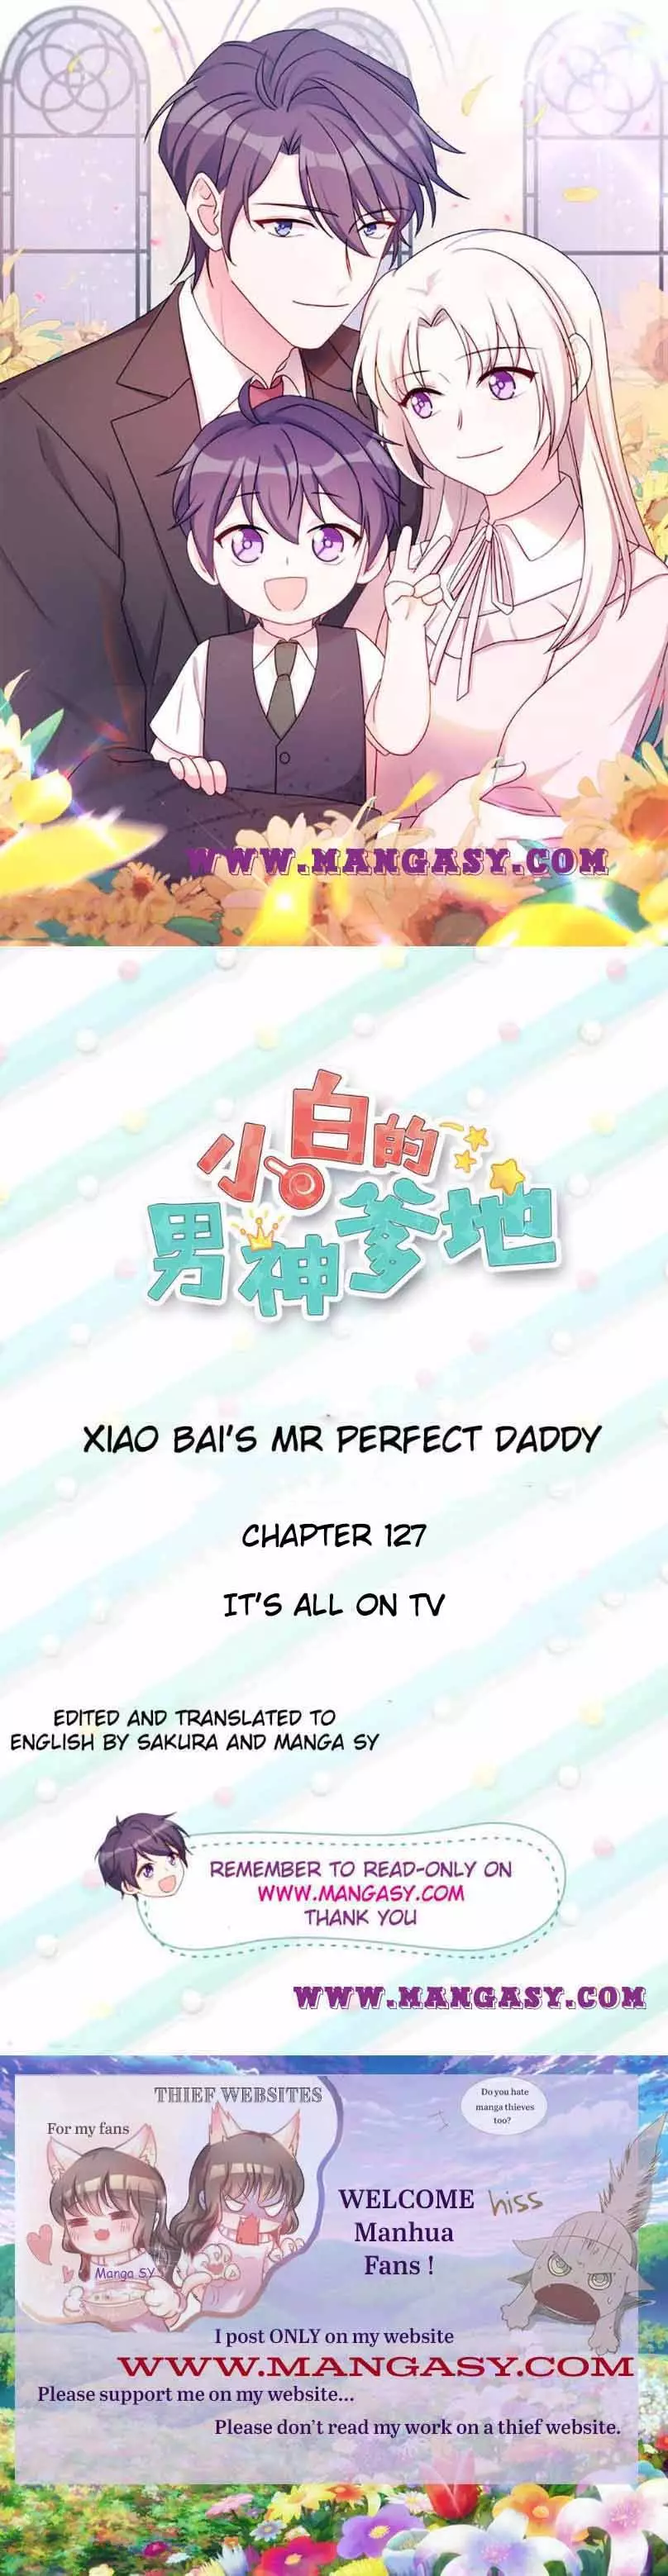 Xiao Bai’S Father Is A Wonderful Person - 127 page 1-74cefbc6